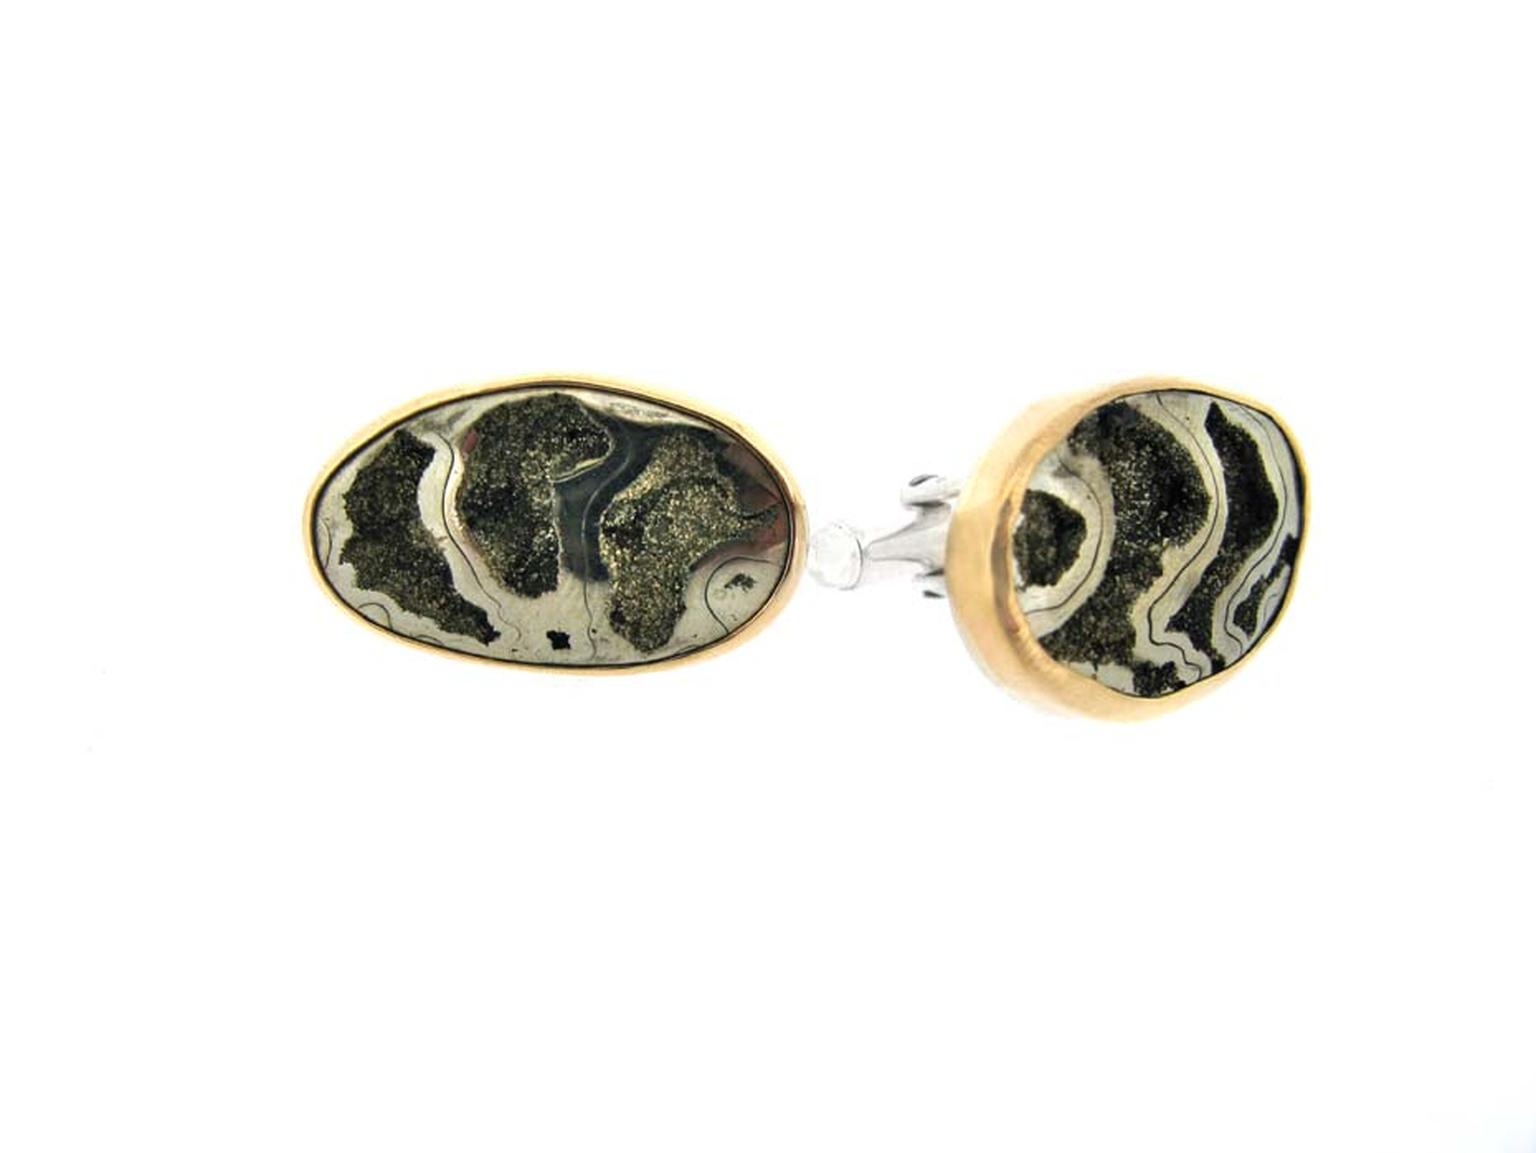 Melissa Joy Manning cufflinks with ammonite and natural stripes of pyrite.